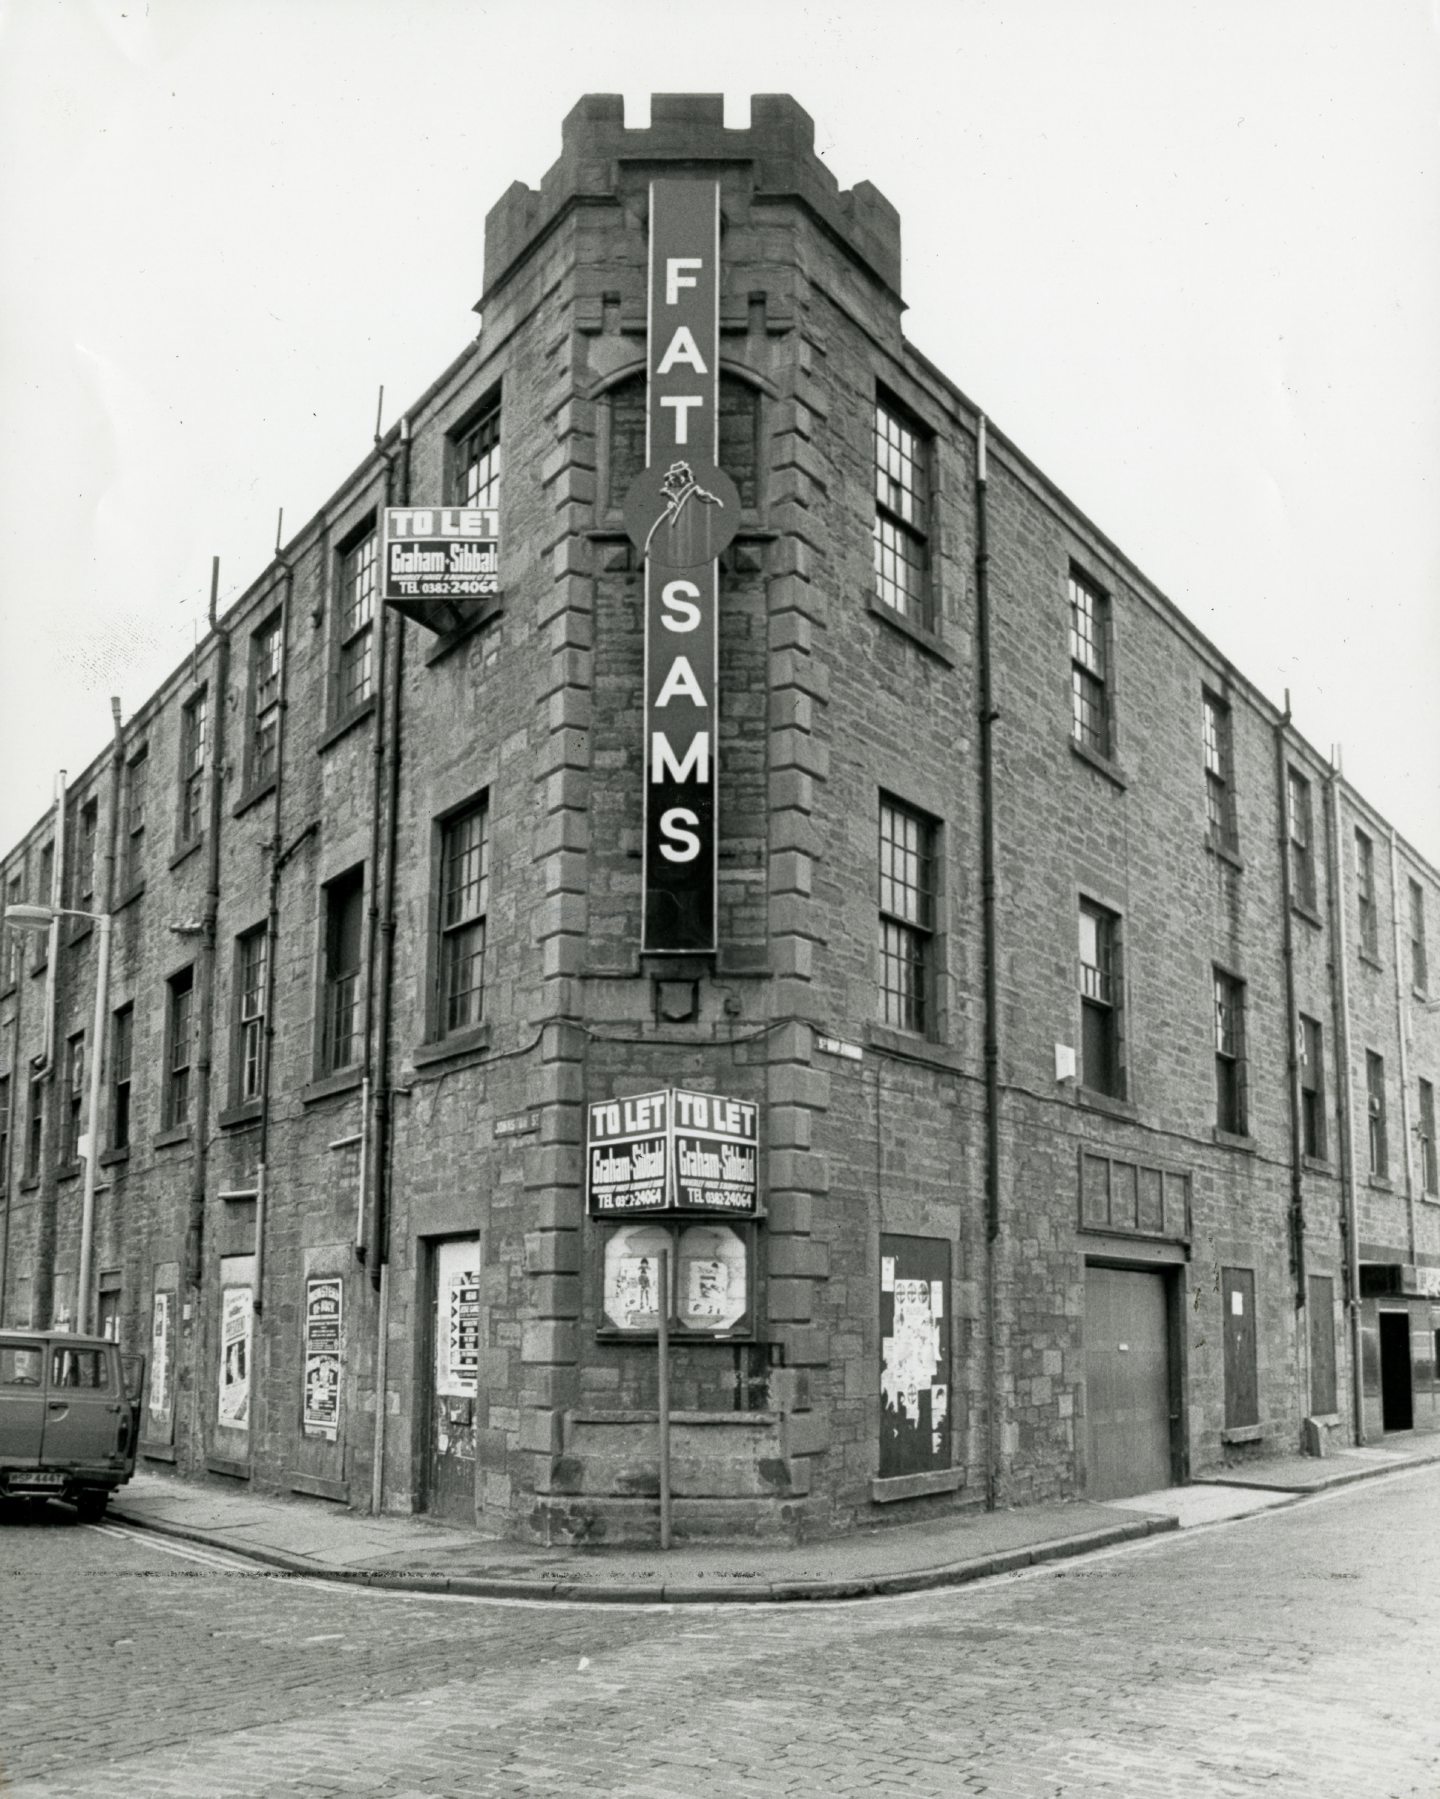 The exterior of Fat Sam's in Dundee